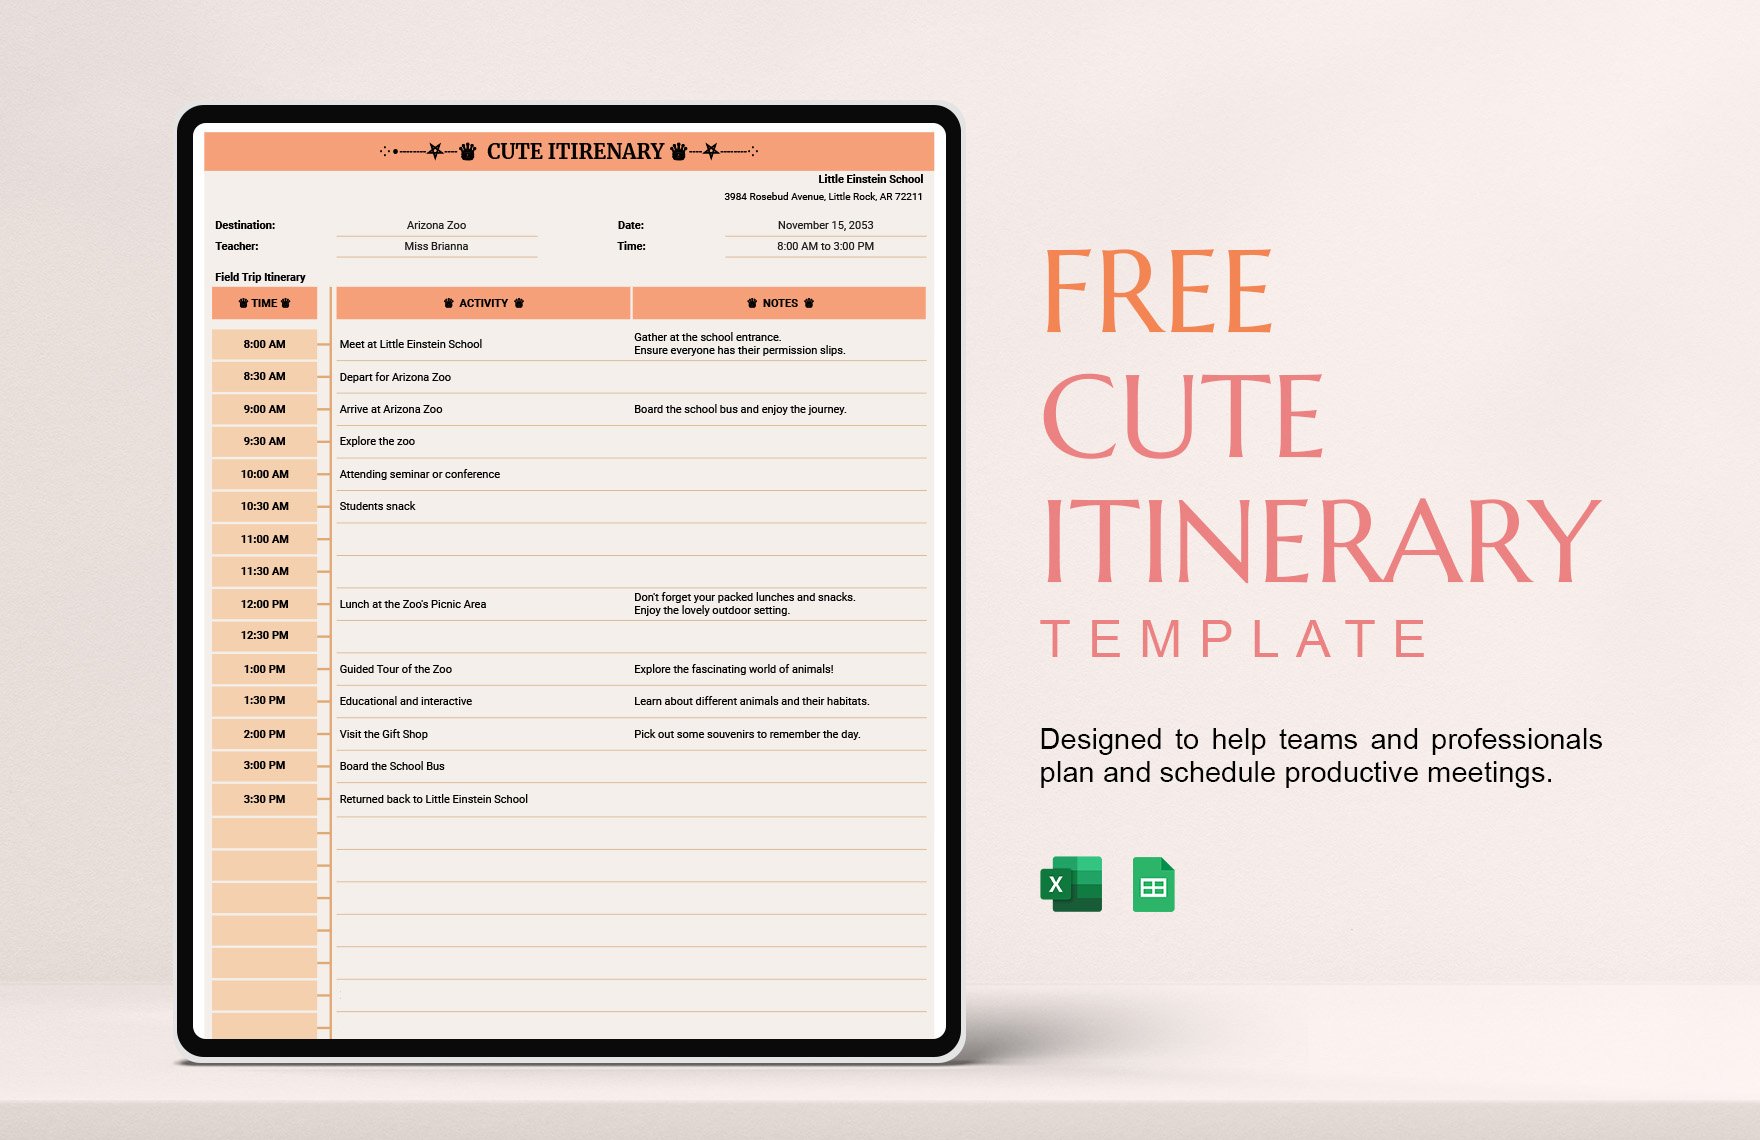 Free Cute Itinerary Template